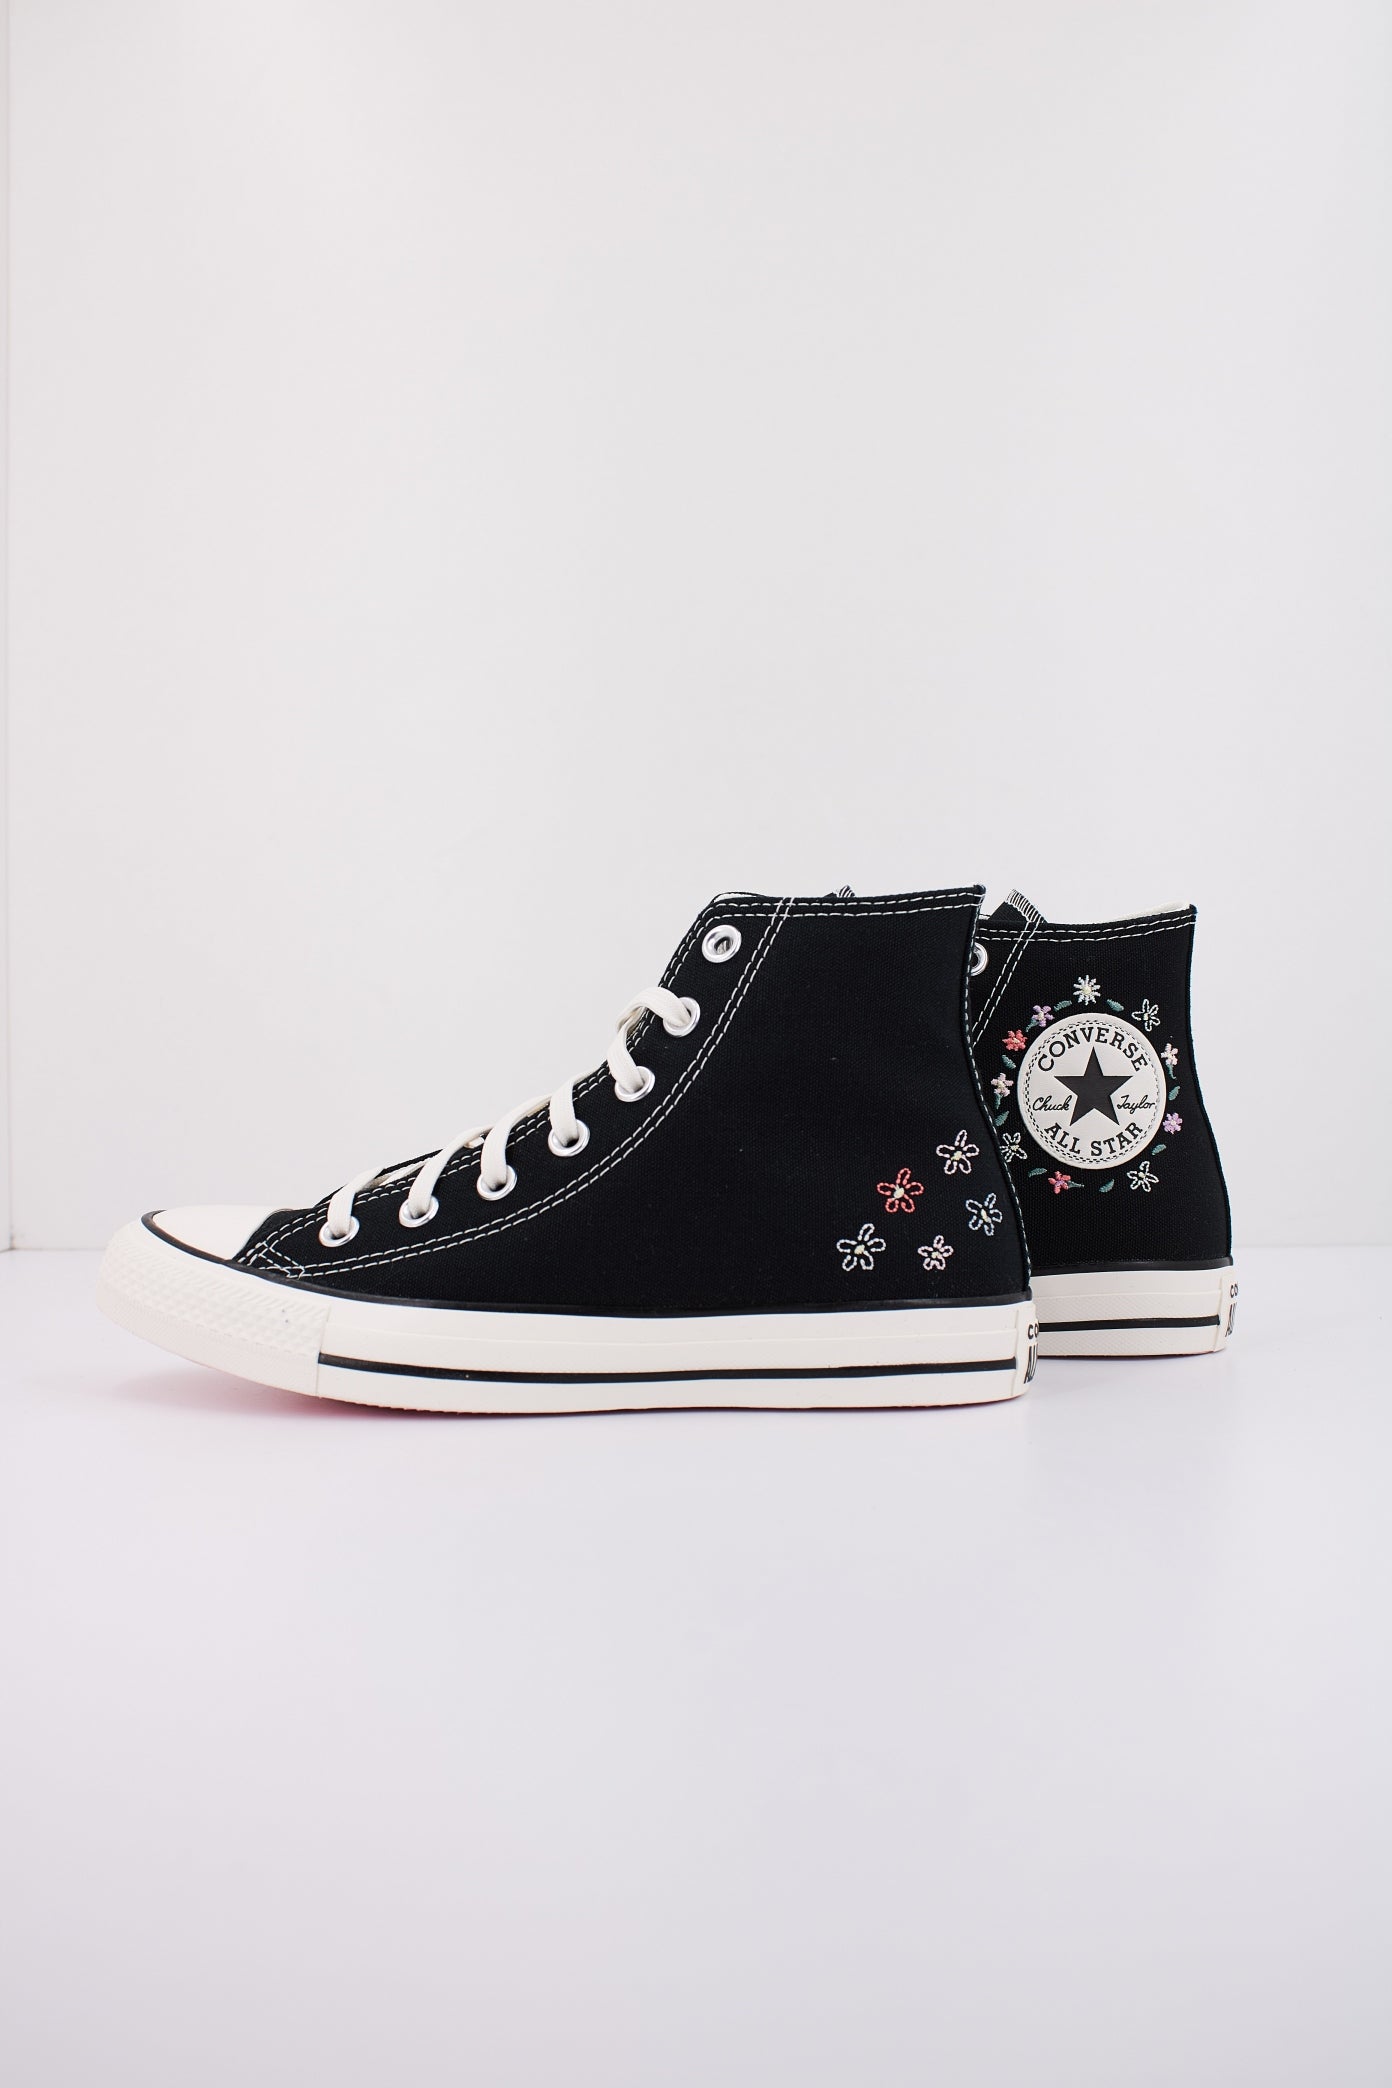 CONVERSE  CHUCK TAYLOR ALL STAR EMBROIDERED LITTLE FLOWERS en color NEGRO  (1)